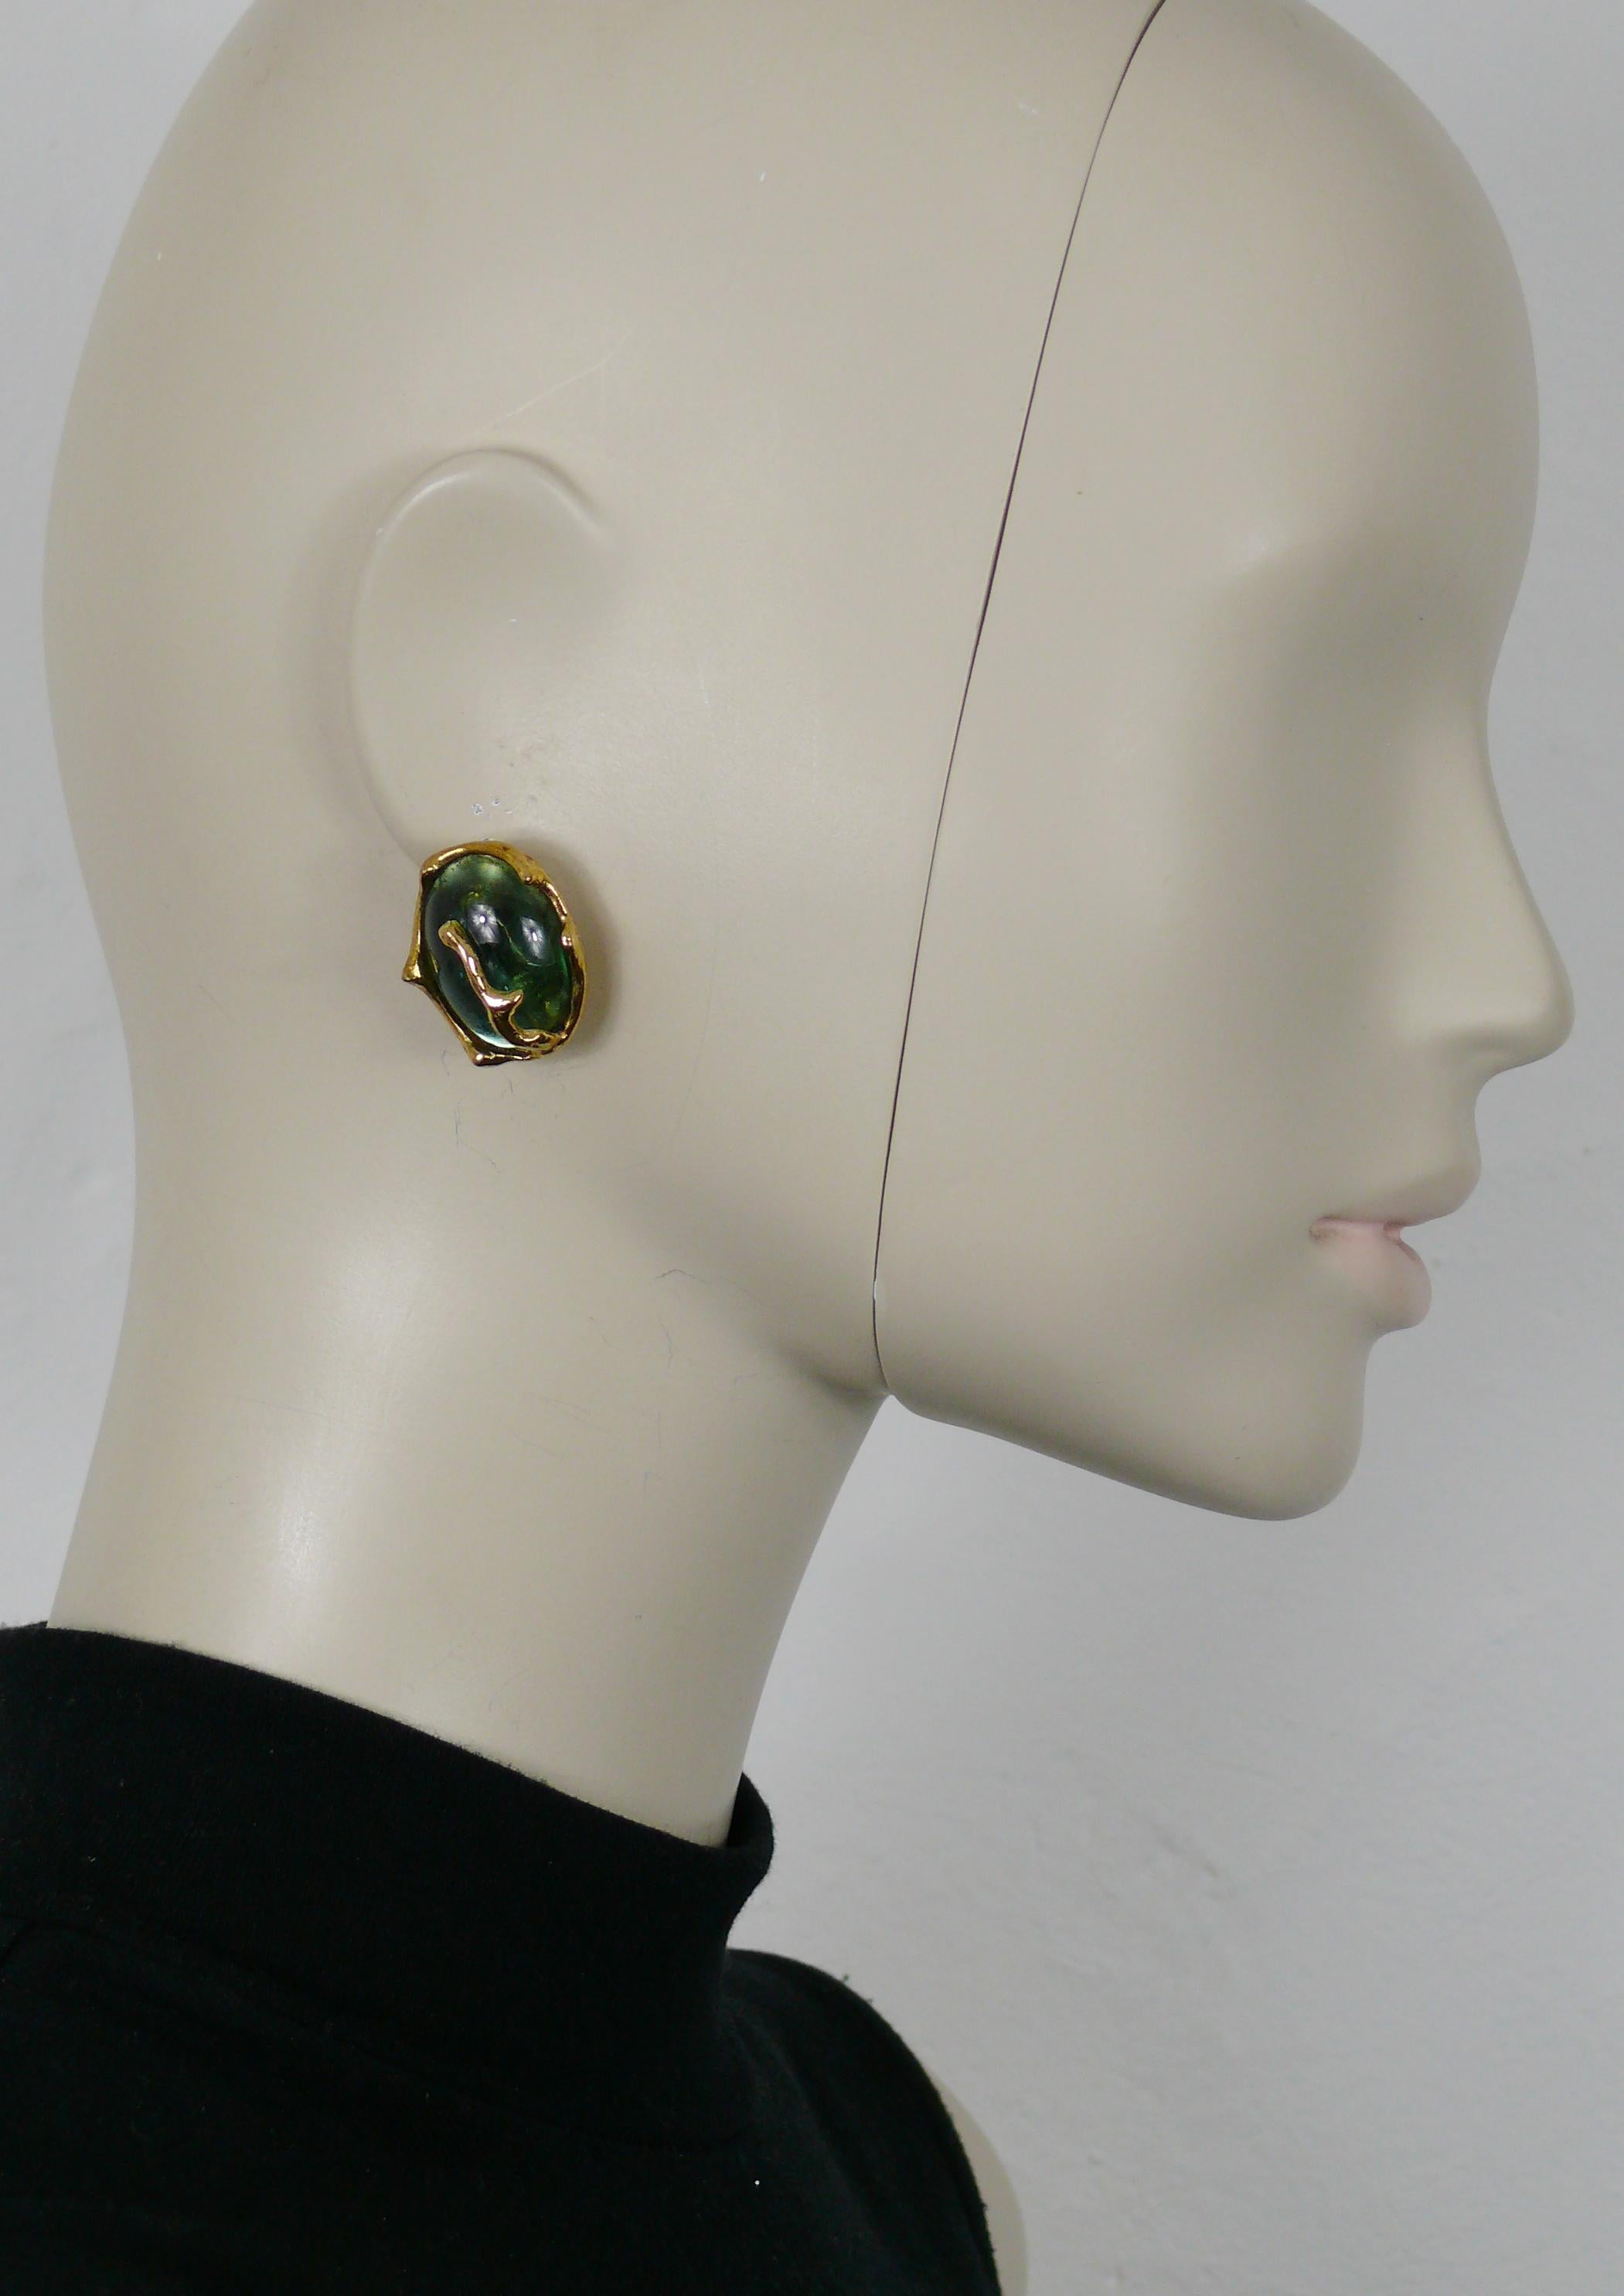 YVES SAINT LAURENT vintage oval-shaped gold tone clip-on earrings embellished with a green resin cabochon.

Embossed YSL Made in France.

Indicative measurements : height approx. 2.5 cm (0.98 inch) / max. width approx. 2 cm (0.79 inch).

Weight per